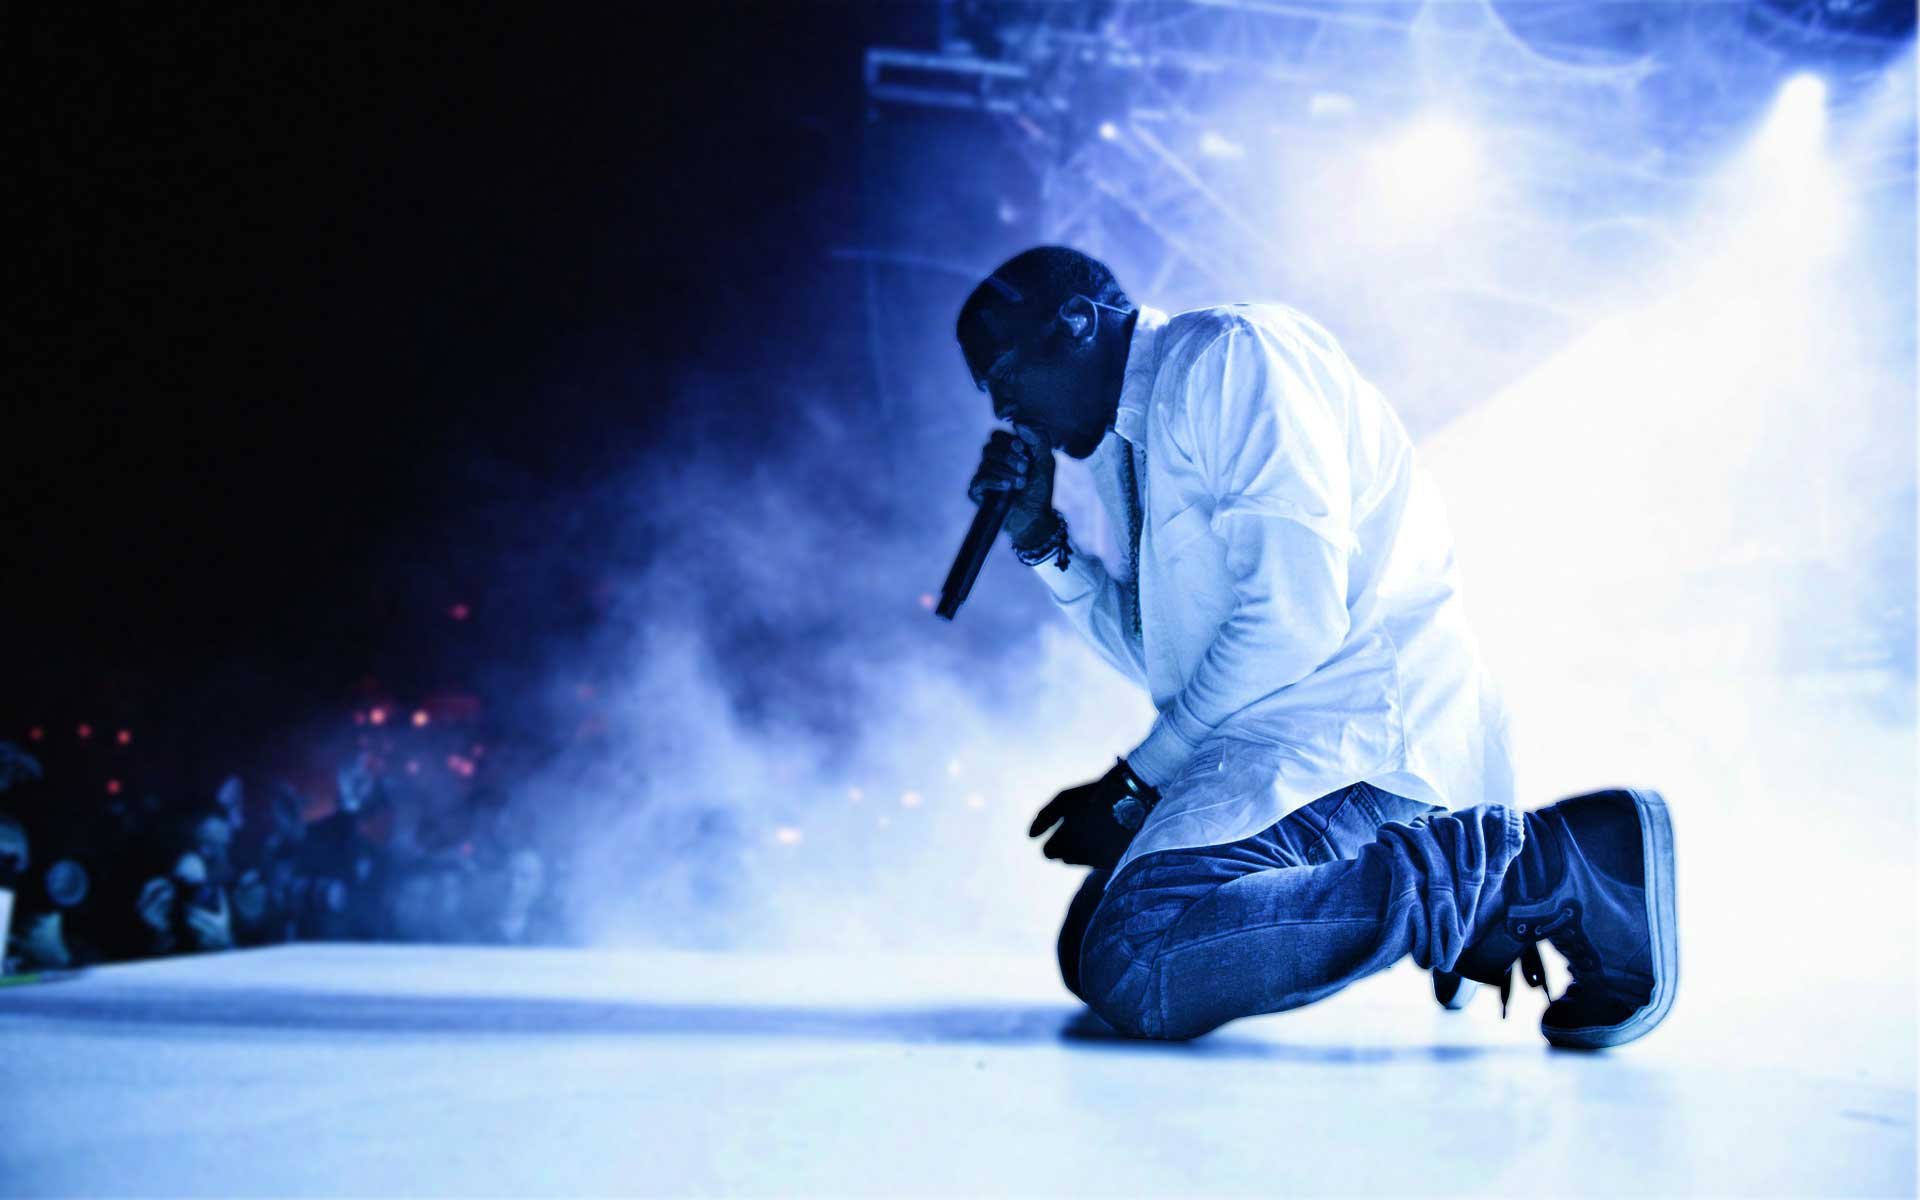 Kanye West Desktop Wallpaper Kanye West Desktop 1920x1200 Wallpaper Teahub Io If you see some hd kanye west wallpaper you'd like to use, just click on the image to download to your desktop or mobile devices. kanye west desktop wallpaper kanye